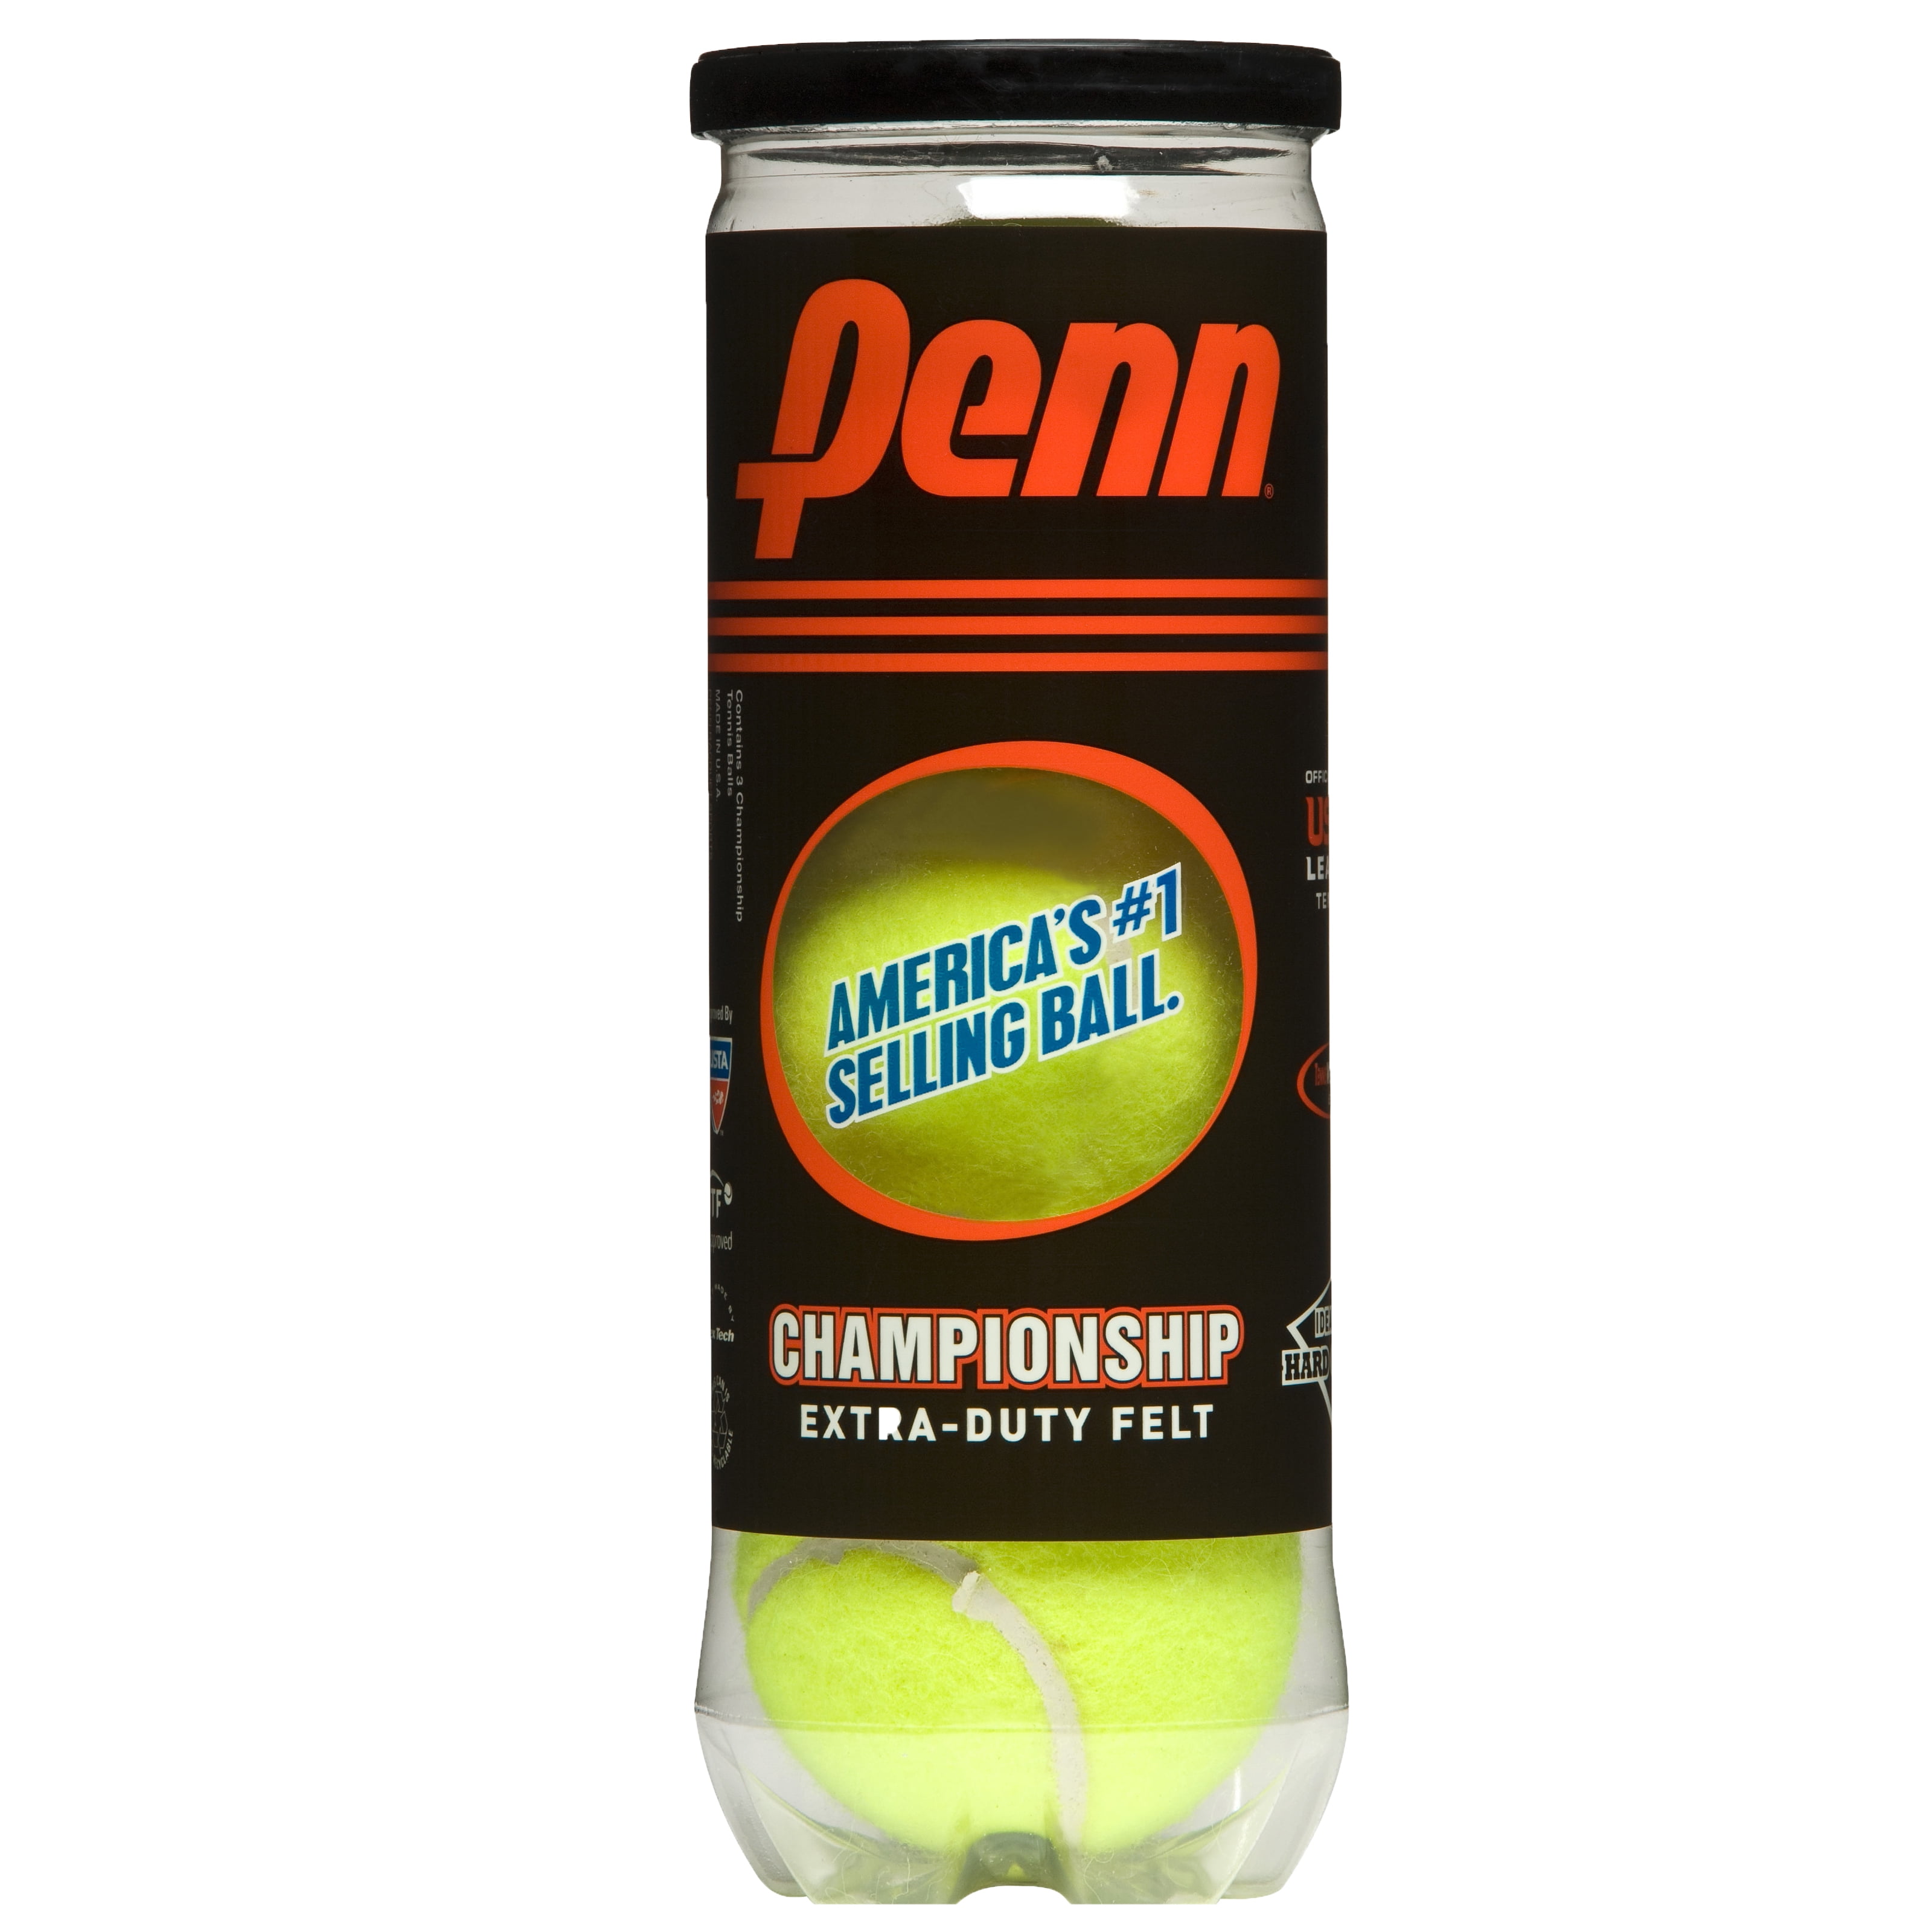 Pack of 2 Cans, Penn Championship Extra Duty Tennis Ball NEW 6 Yellow Balls 